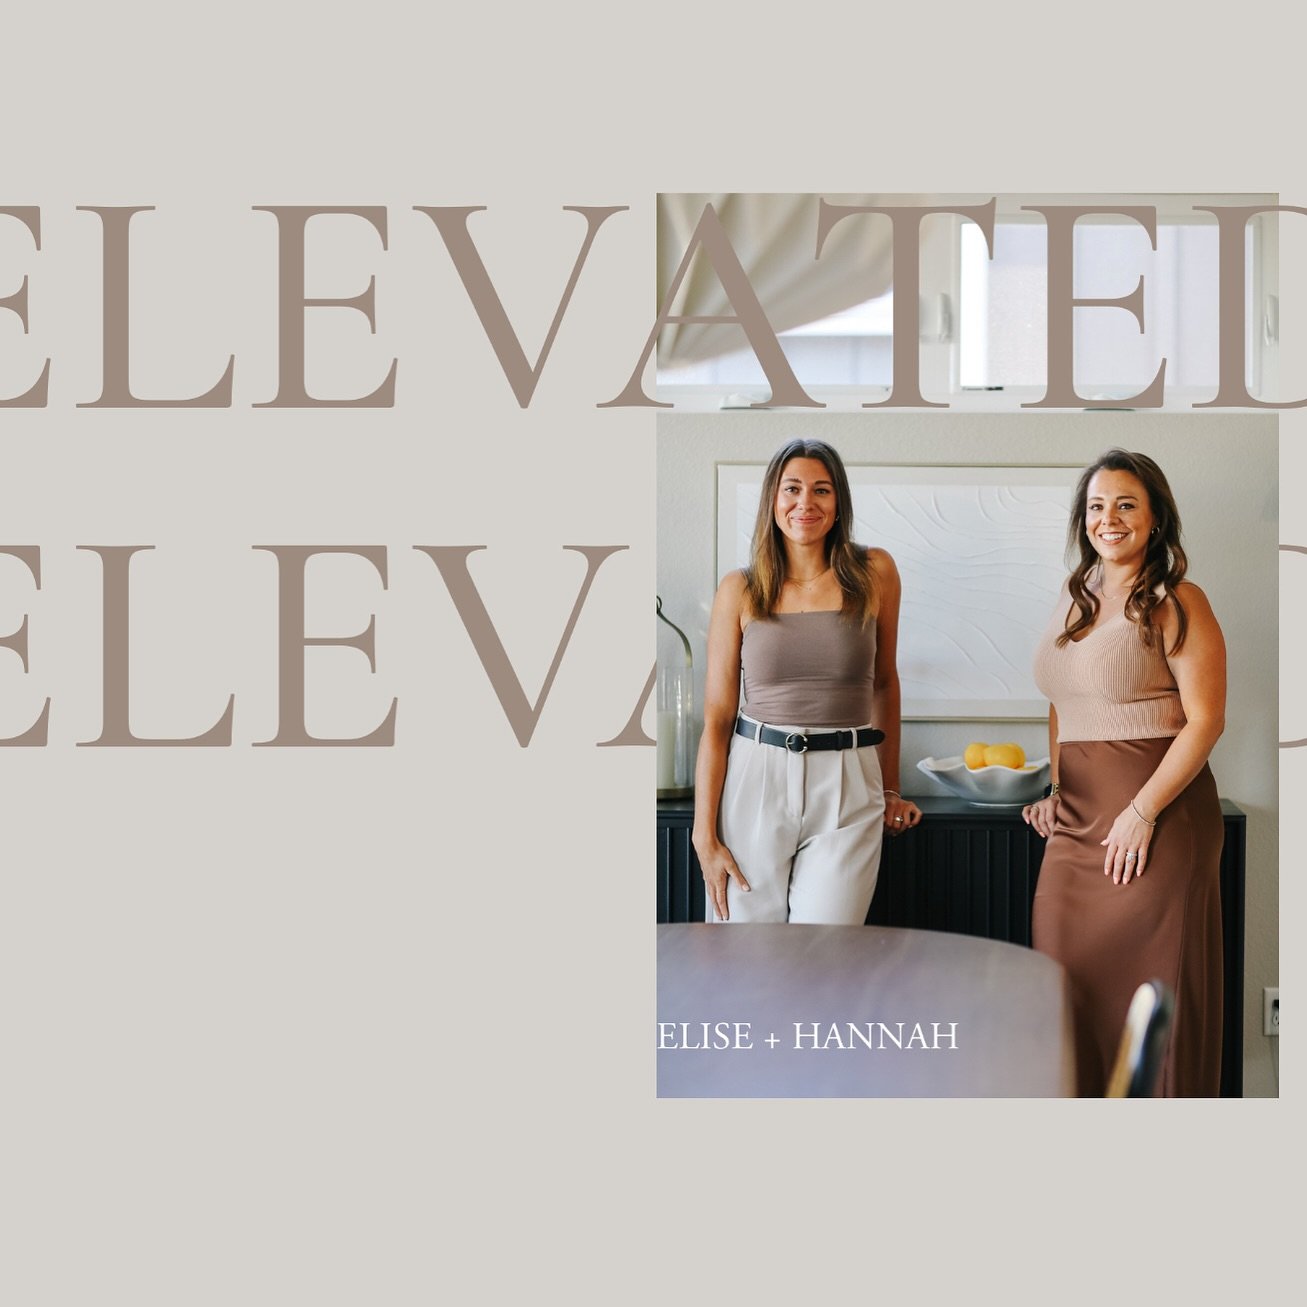 What is E L E V A T E D ? 

We&rsquo;re a sister duo passionate about making manageable changes to create a more elevated life. Located in Denver, we live at elevation and decided that word perfectly described the sense of self we hope to inspire in 